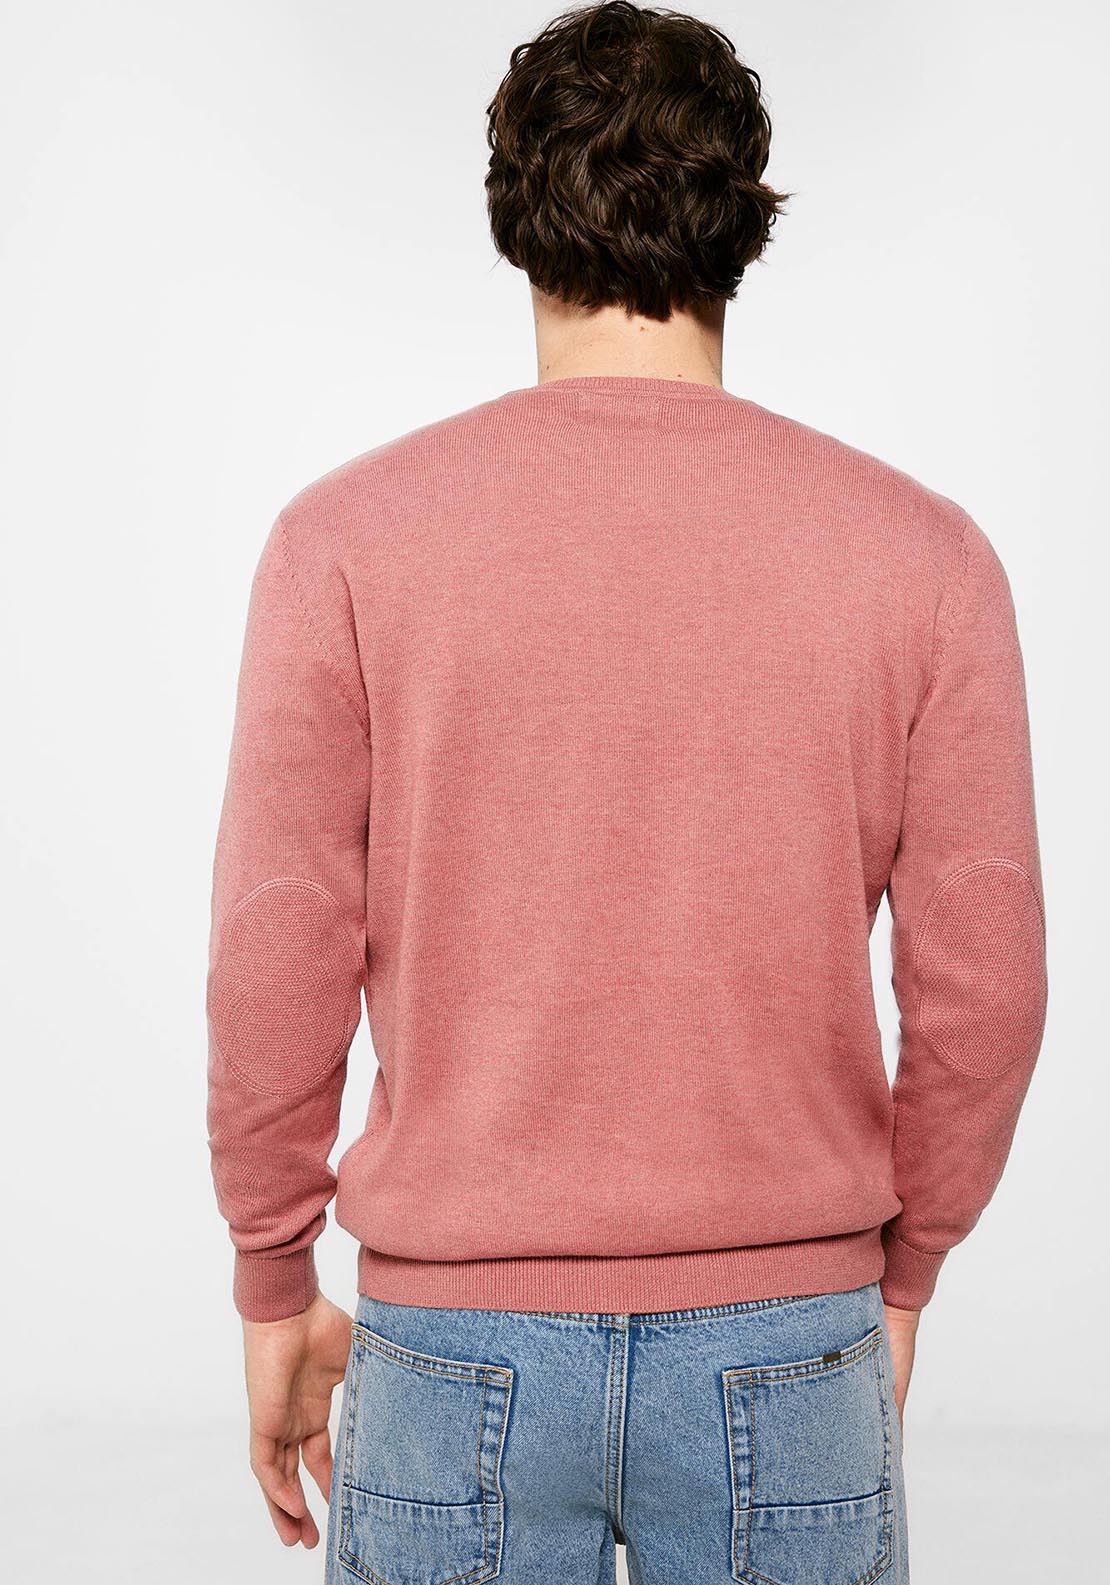 Springfield Essential jumper with elbow patches - Pink 3 Shaws Department Stores